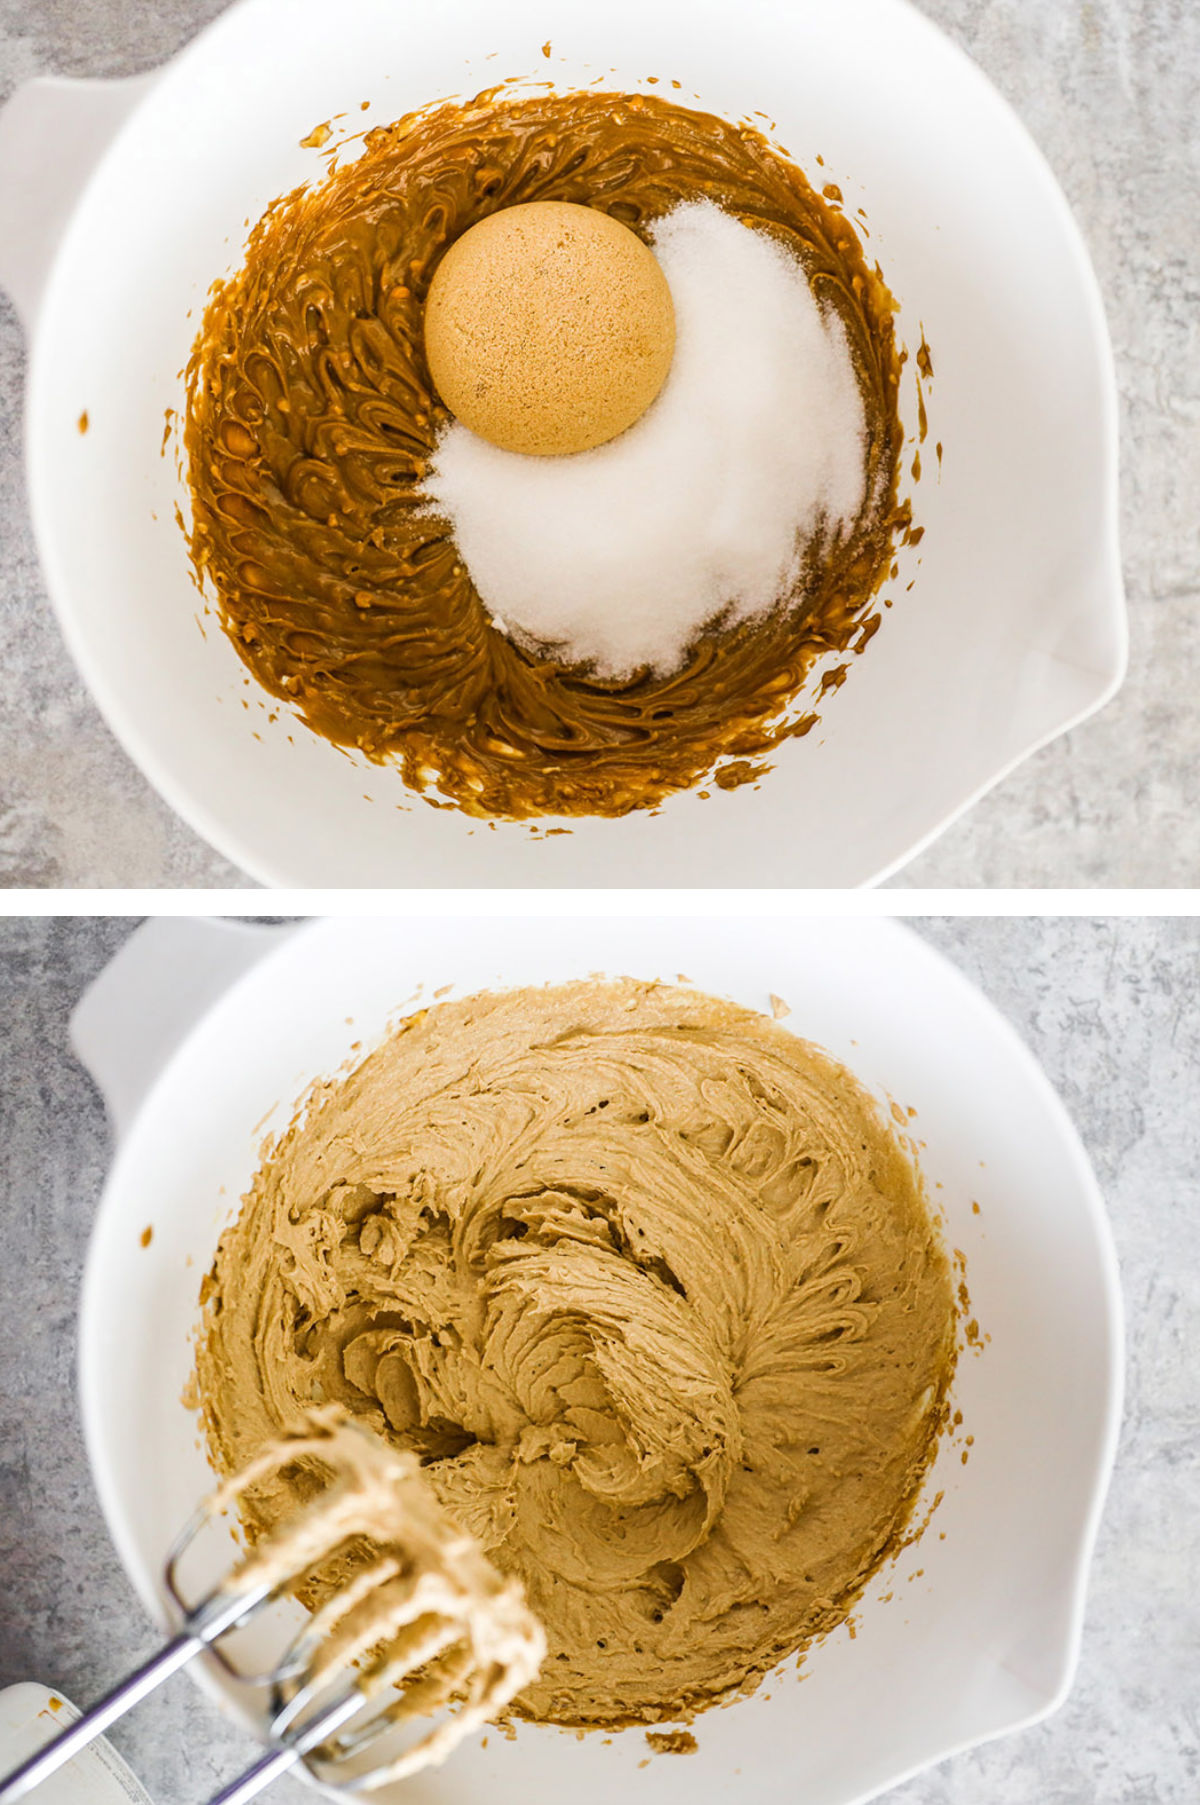 Two overhead images in one: 1. White and brown sugar are added to the bowl. 2. White and brown sugar are mixed with a hand mixer. 